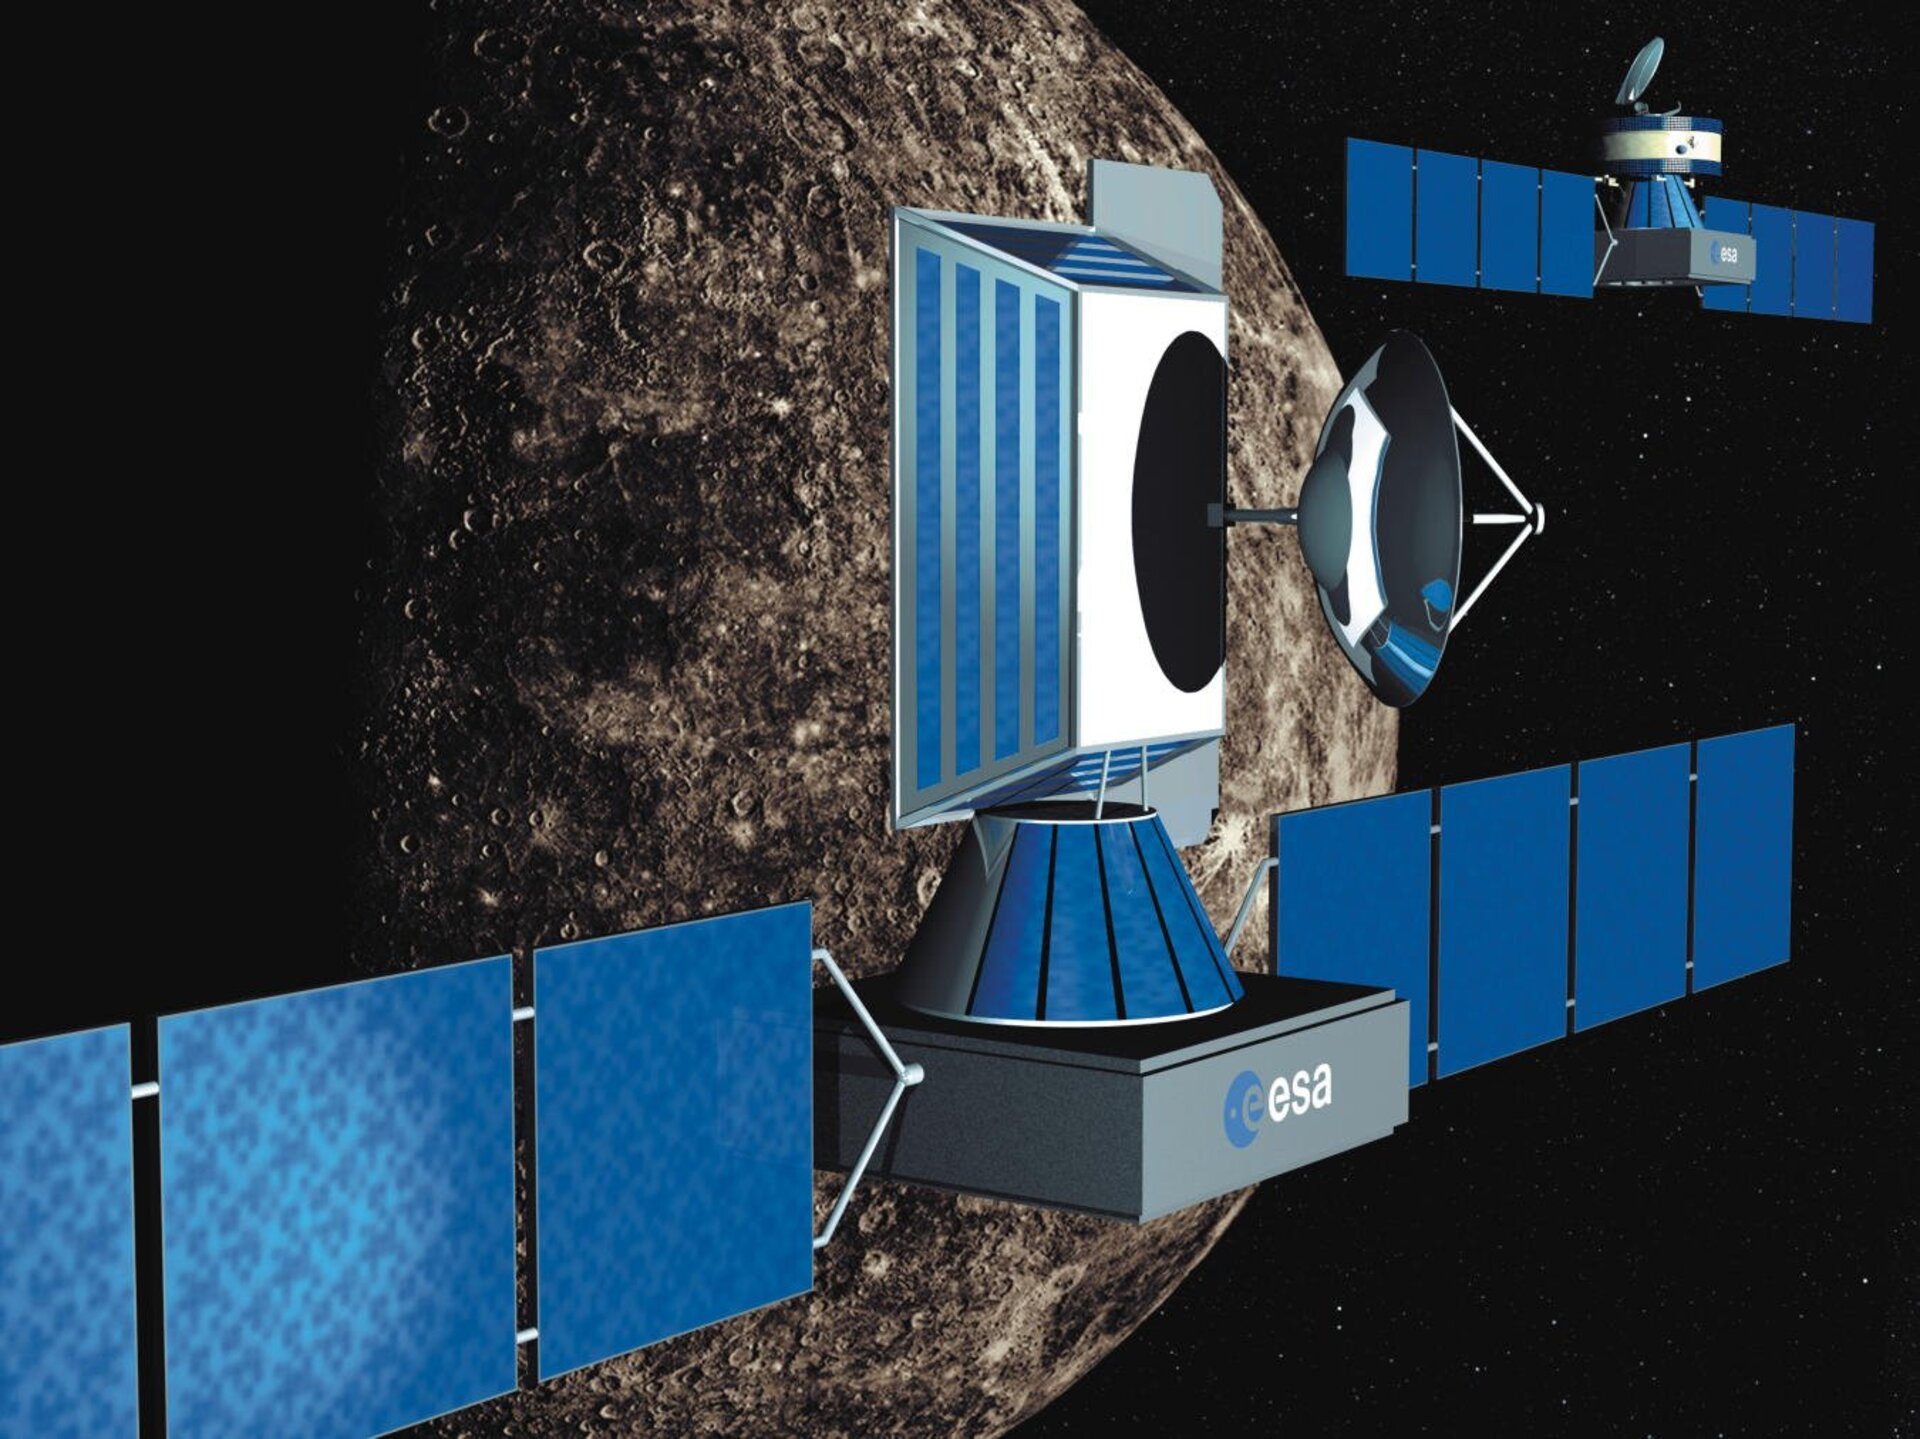 BepiColombo arrriving at the planet Mercury